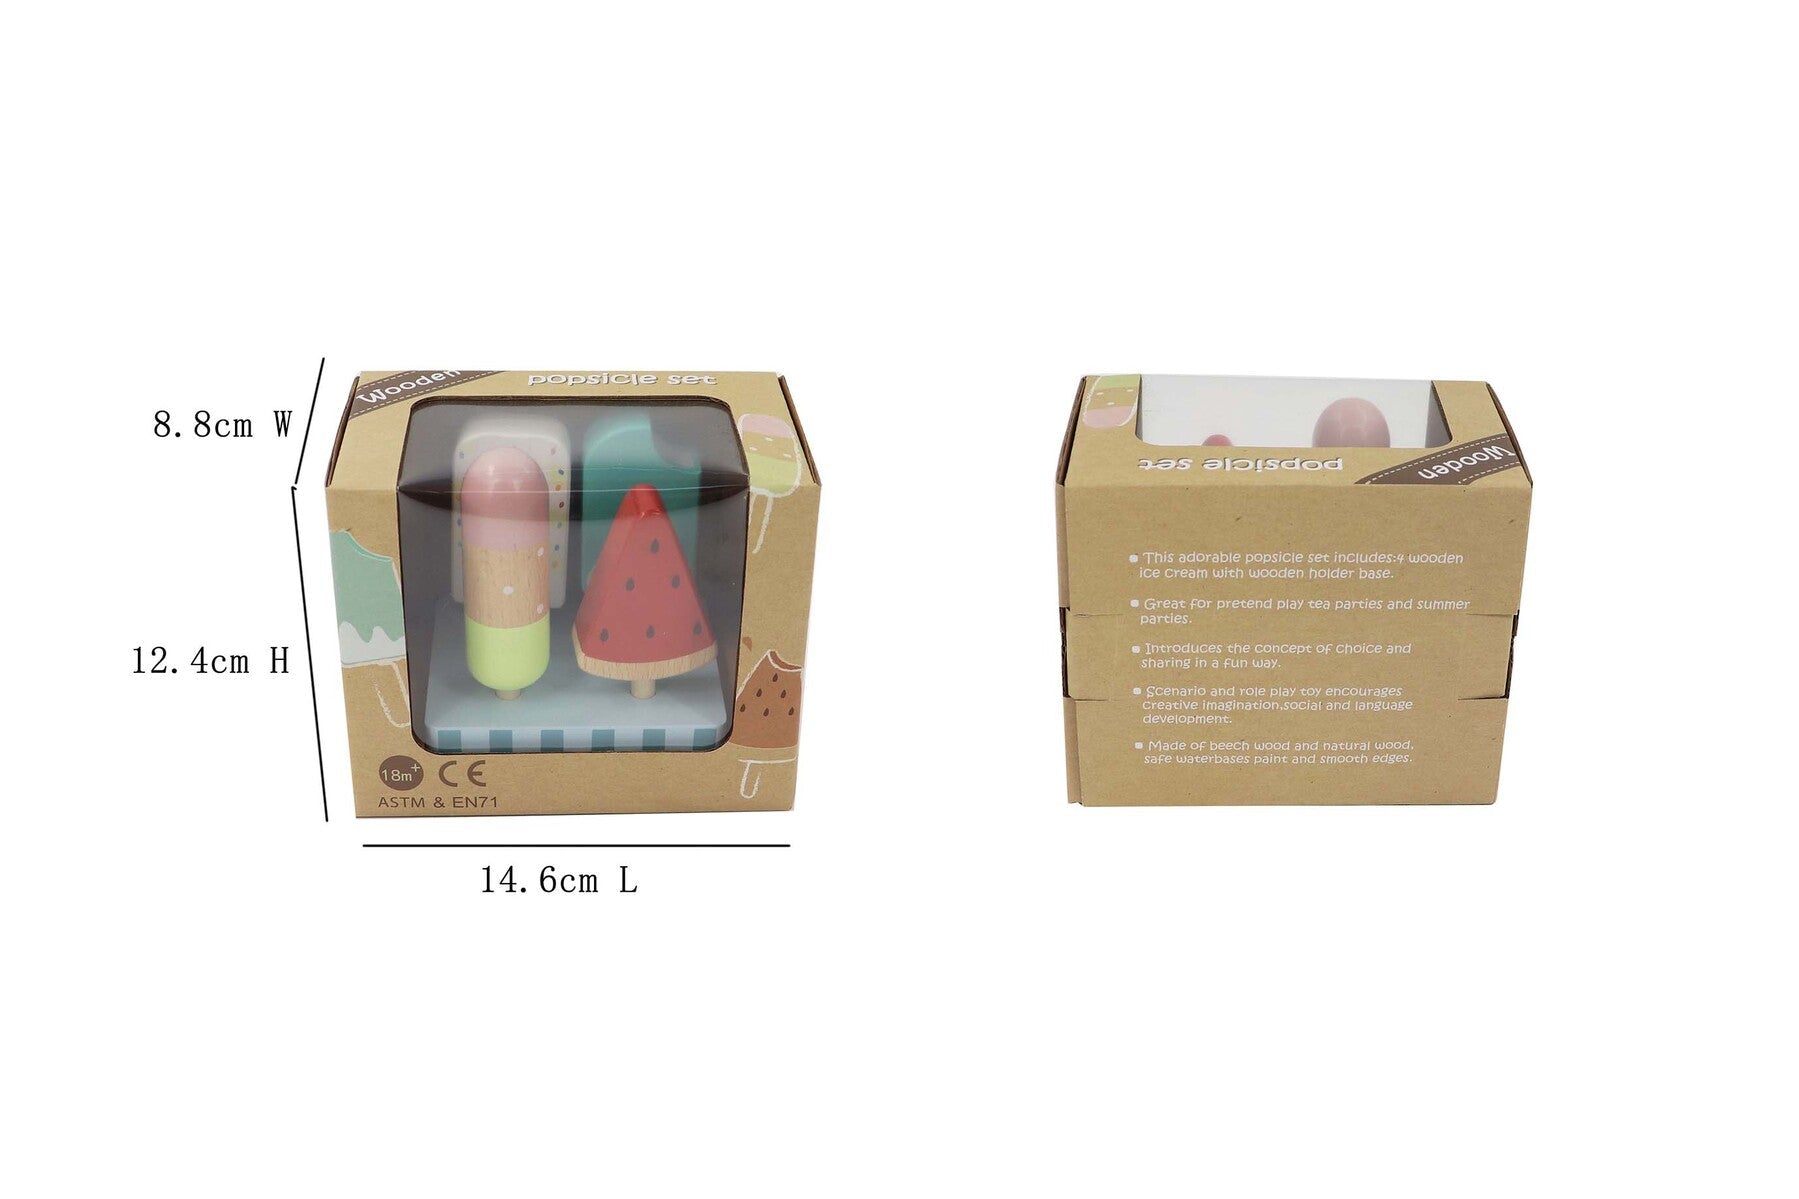 Wooden Icy Pole Set